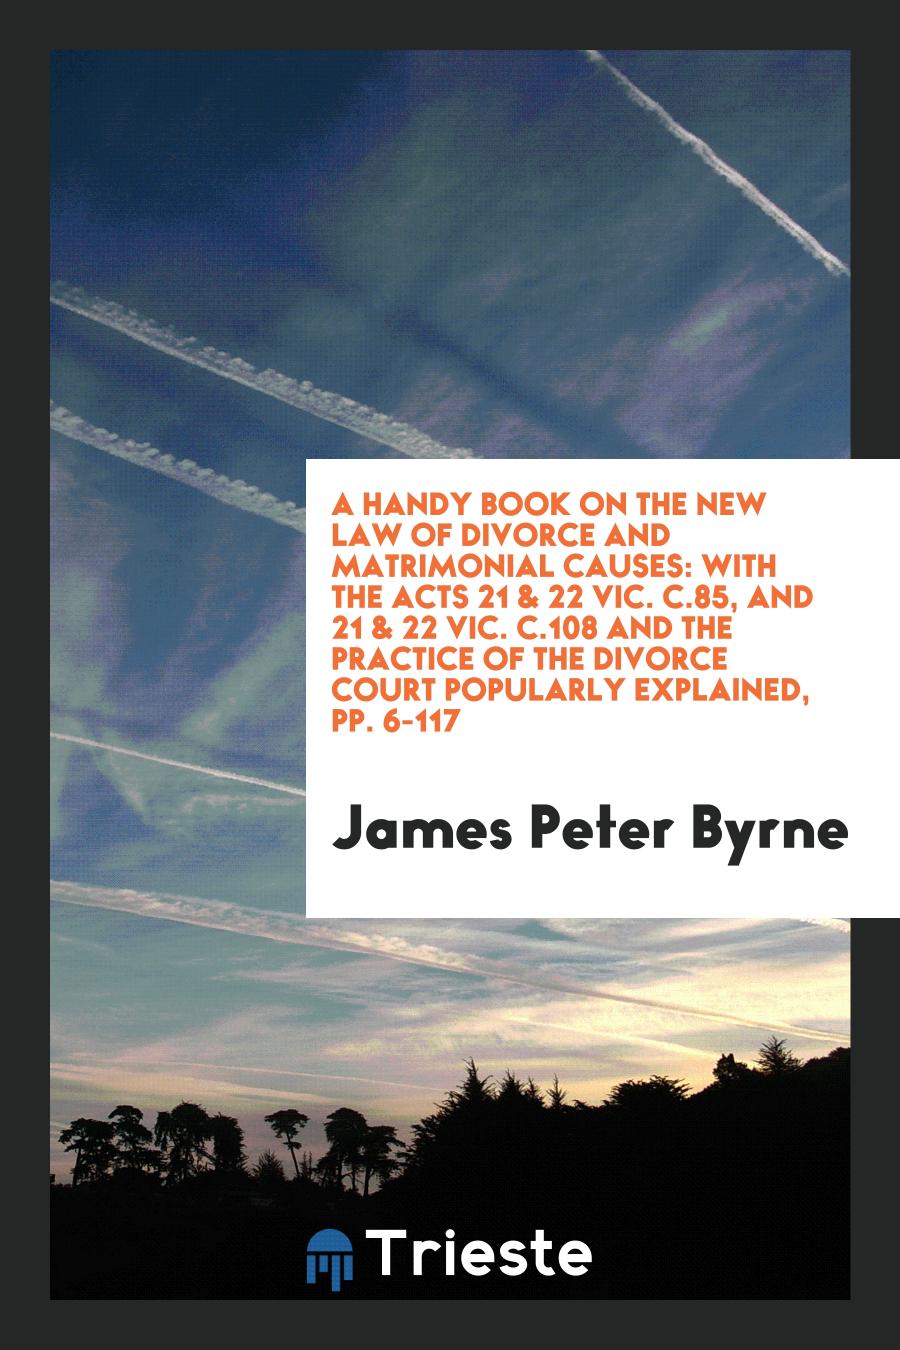 A Handy Book on the New Law of Divorce and Matrimonial Causes: With the Acts 21 & 22 Vic. C.85, and 21 & 22 Vic. C.108 and the Practice of the Divorce Court Popularly Explained, pp. 6-117